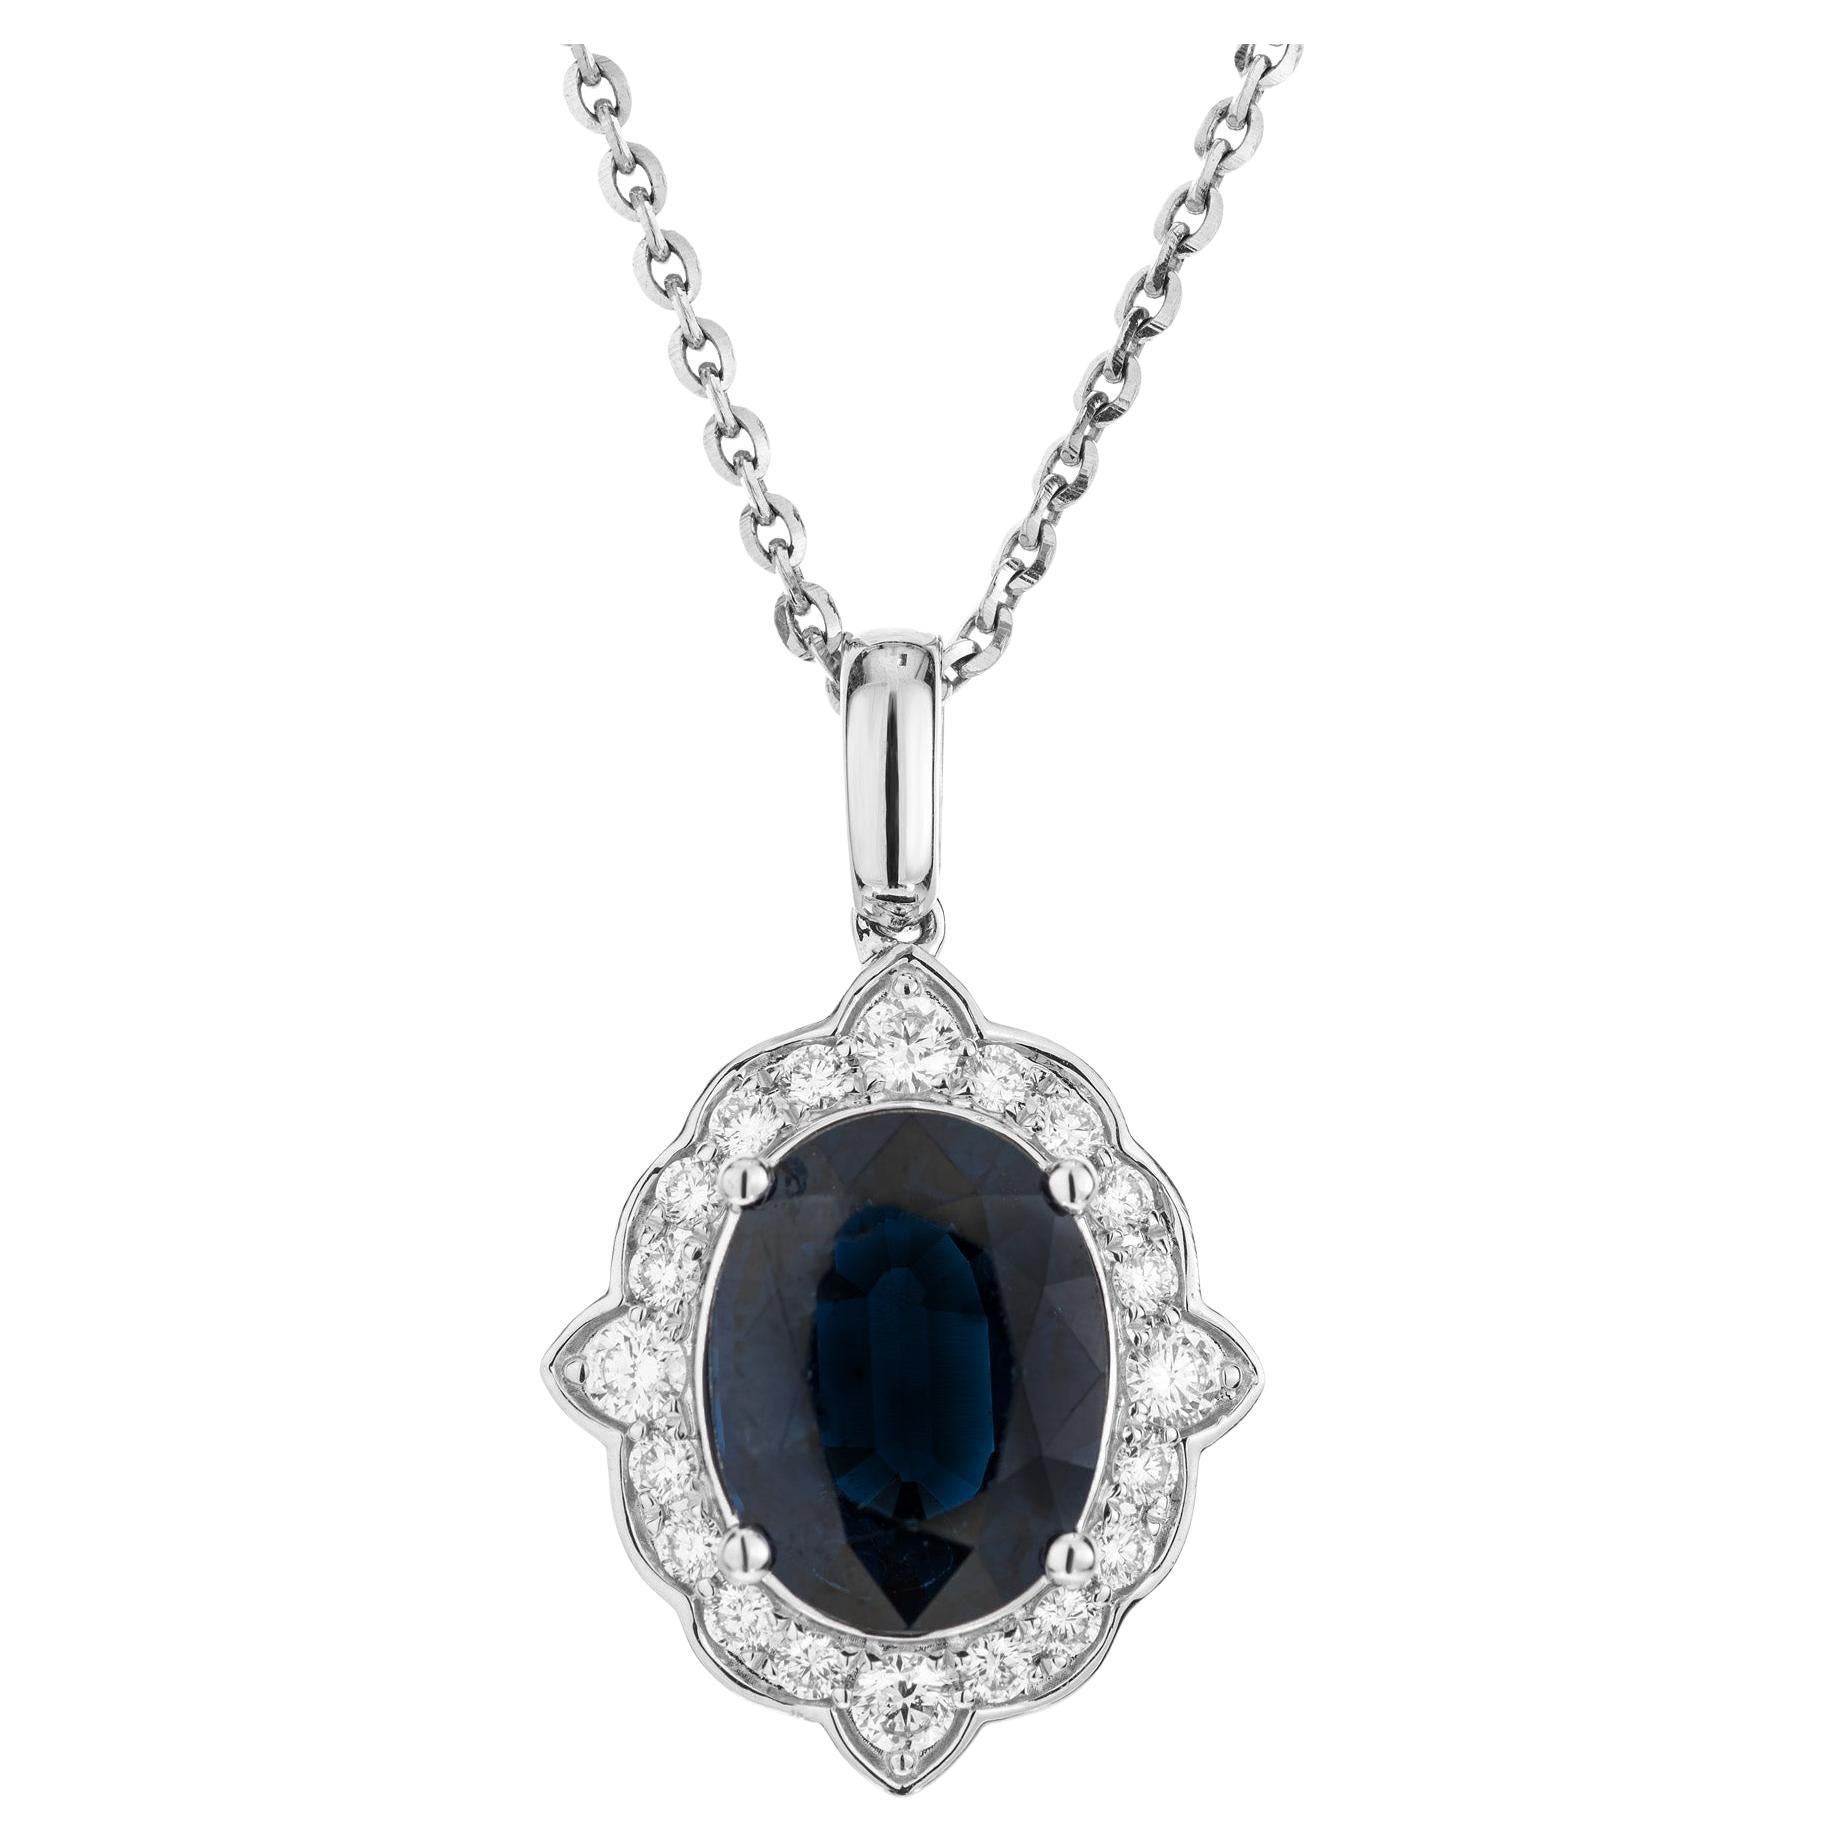 Peter Suchy GIA Certified 4.16 Carat Sapphire Diamond Gold Pendant Necklace For Sale